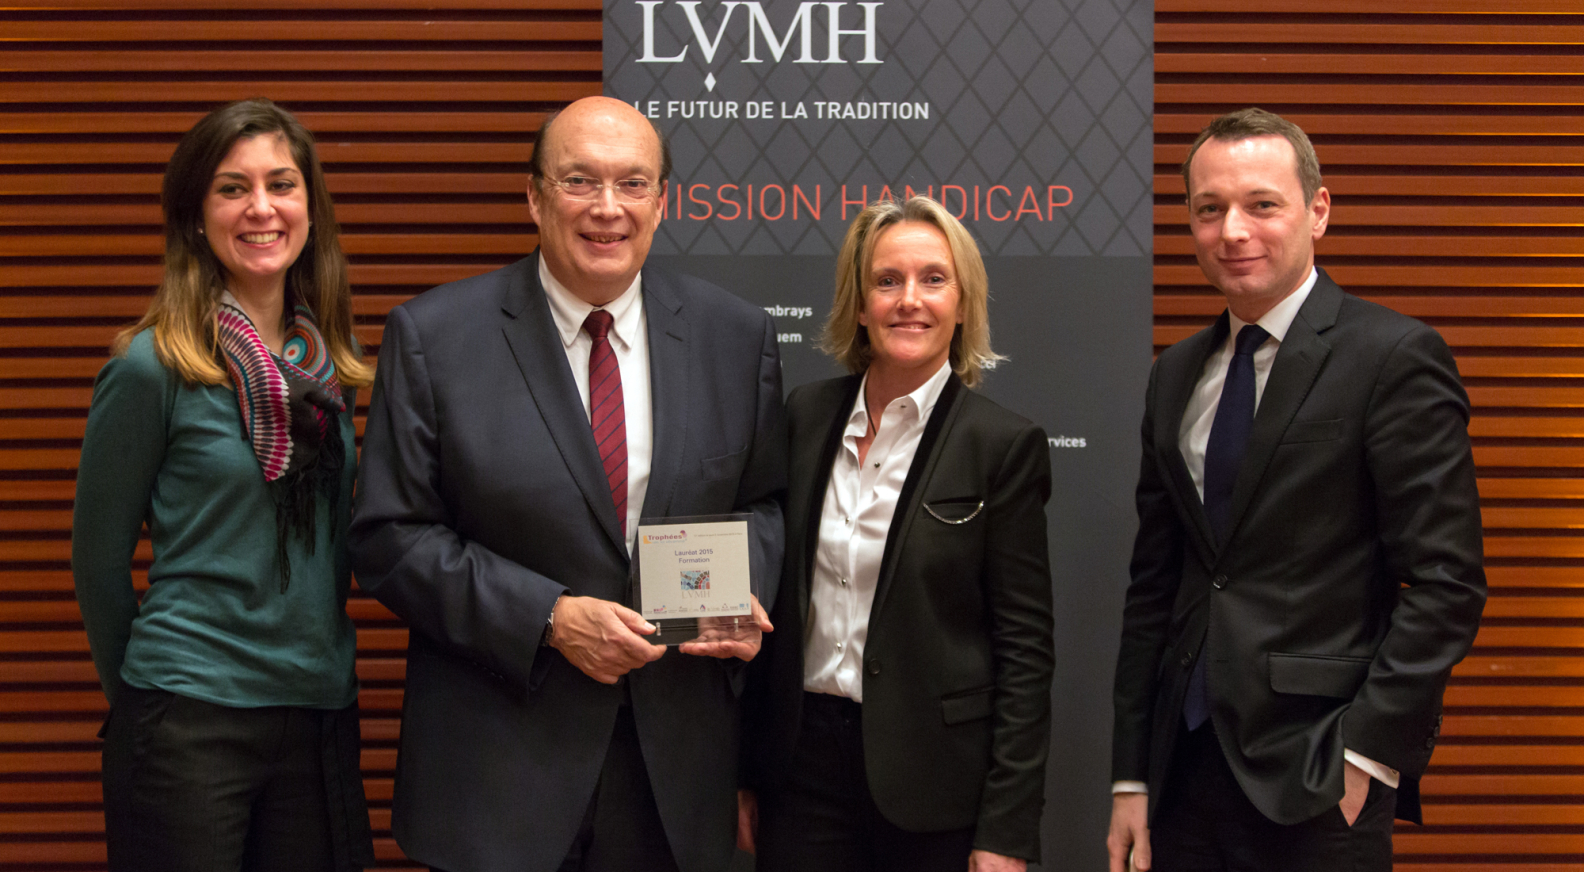 LVMH supports inclusion of people with disabilities - LVMH